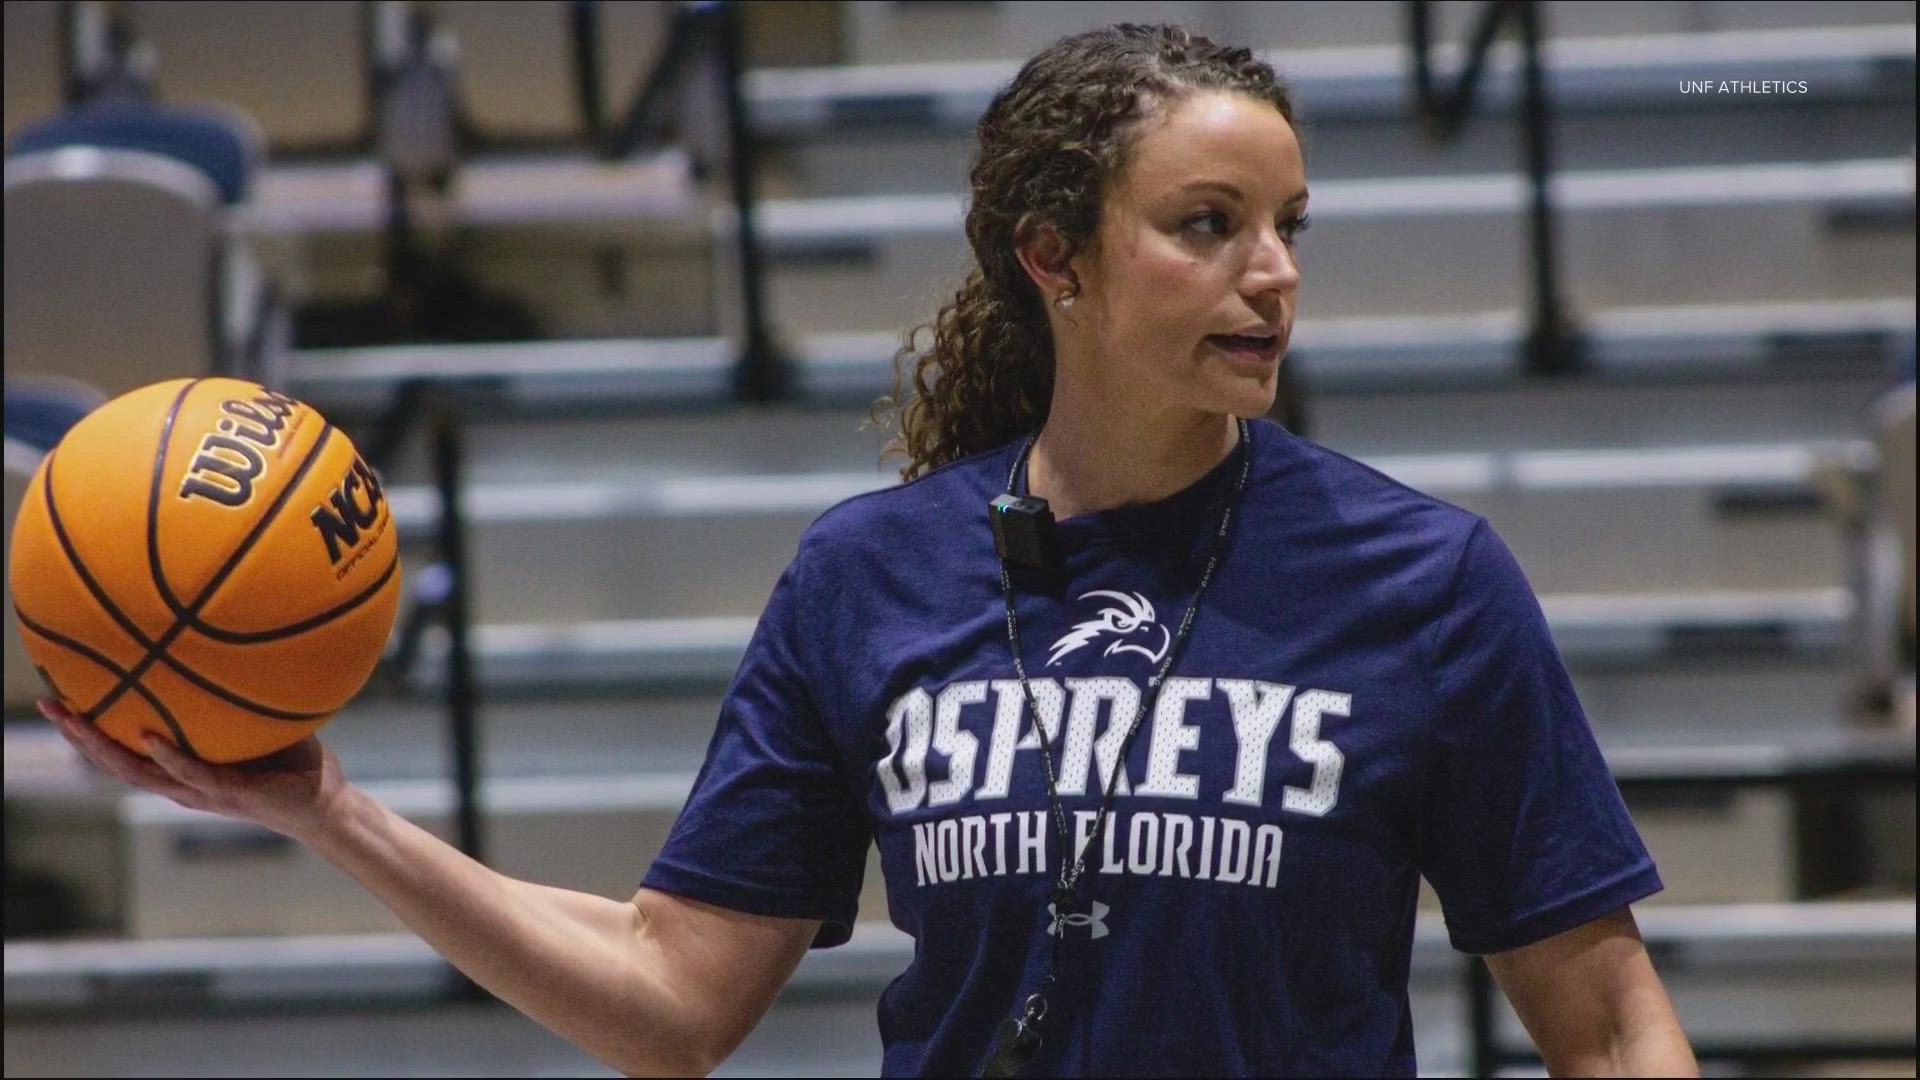 Lambert, who played college basketball at College of Charleston, comes to UNF from Abilene Christian where she was an assistant coach.